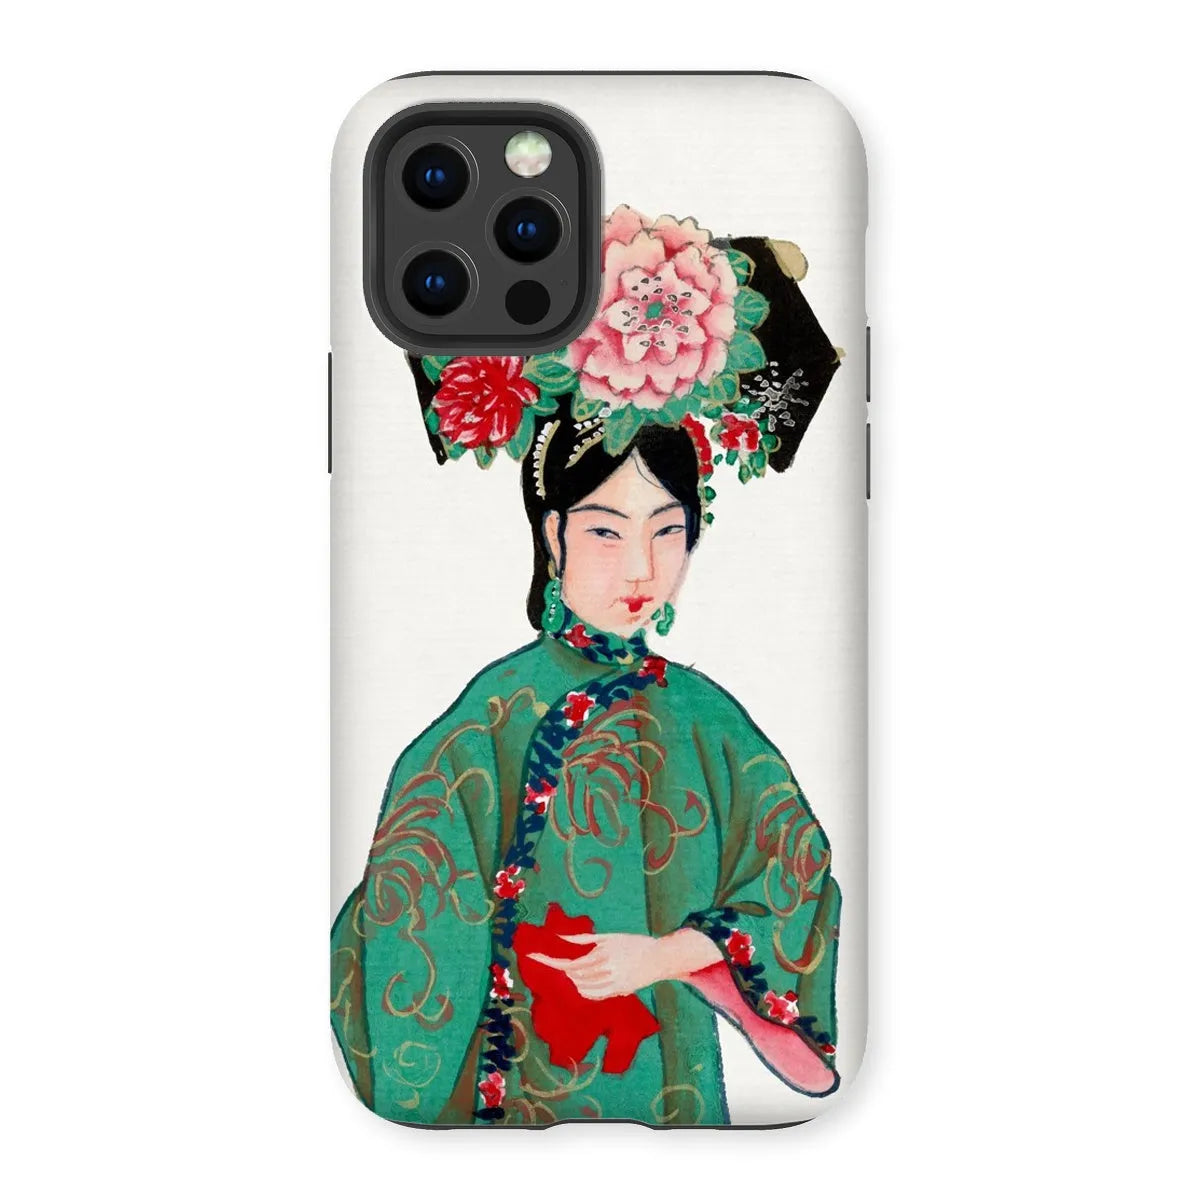 Chinese Noblewoman In Manchu Couture Art Phone Case - Iphone 12 Pro / Matte - Mobile Phone Cases - Aesthetic Art